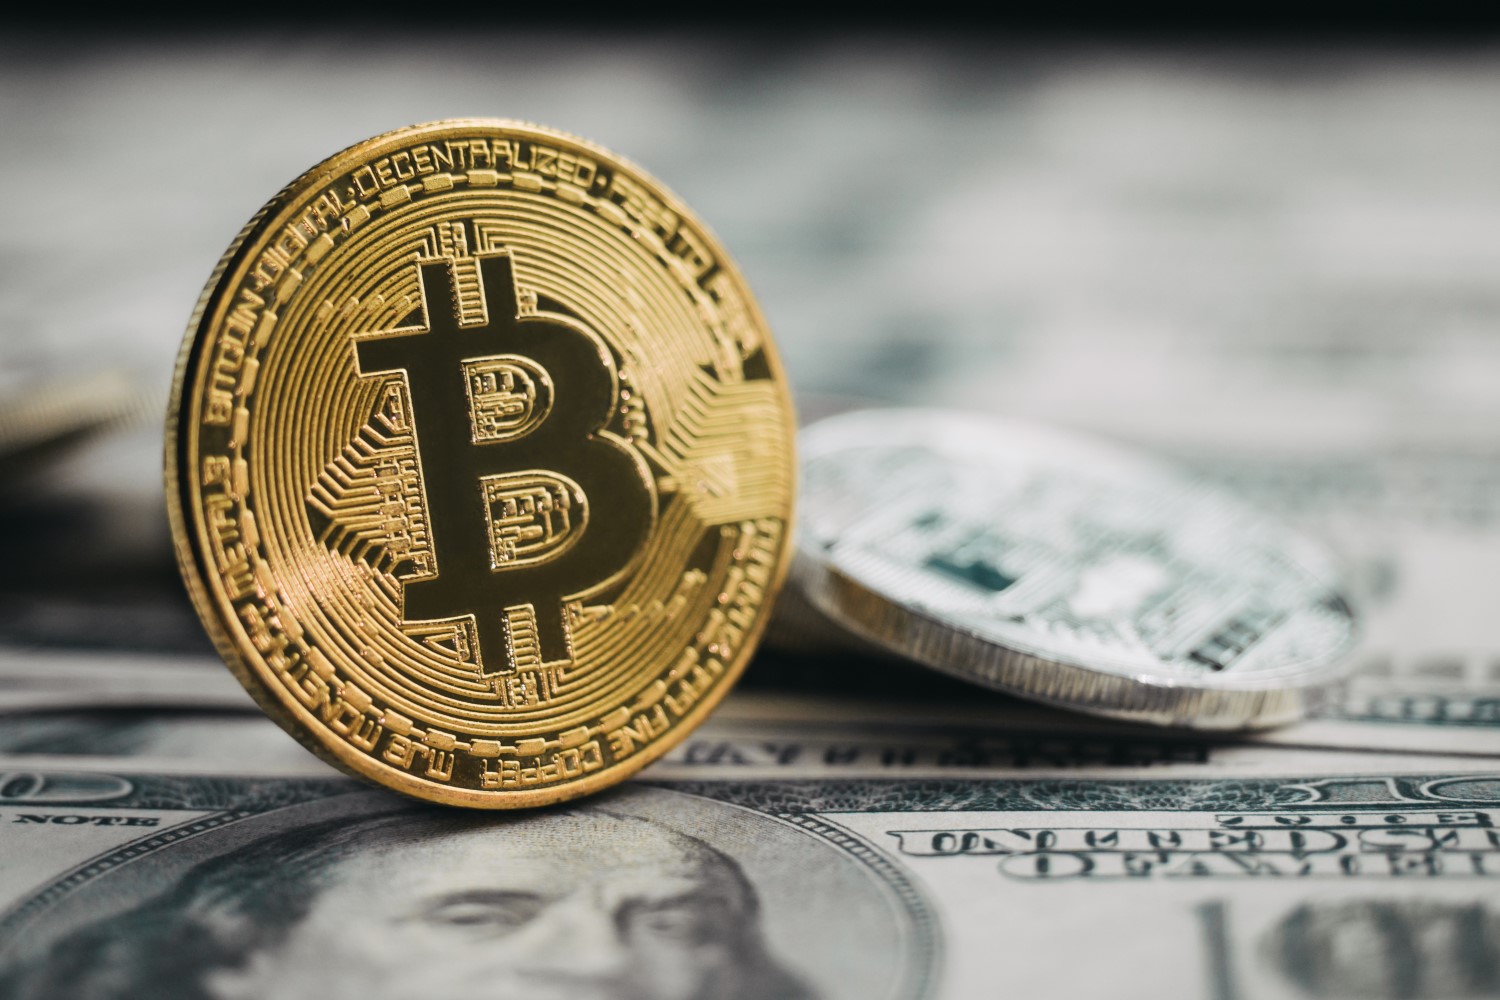 Bulls Under Pressure After Bitcoin Price Retreats From $4K